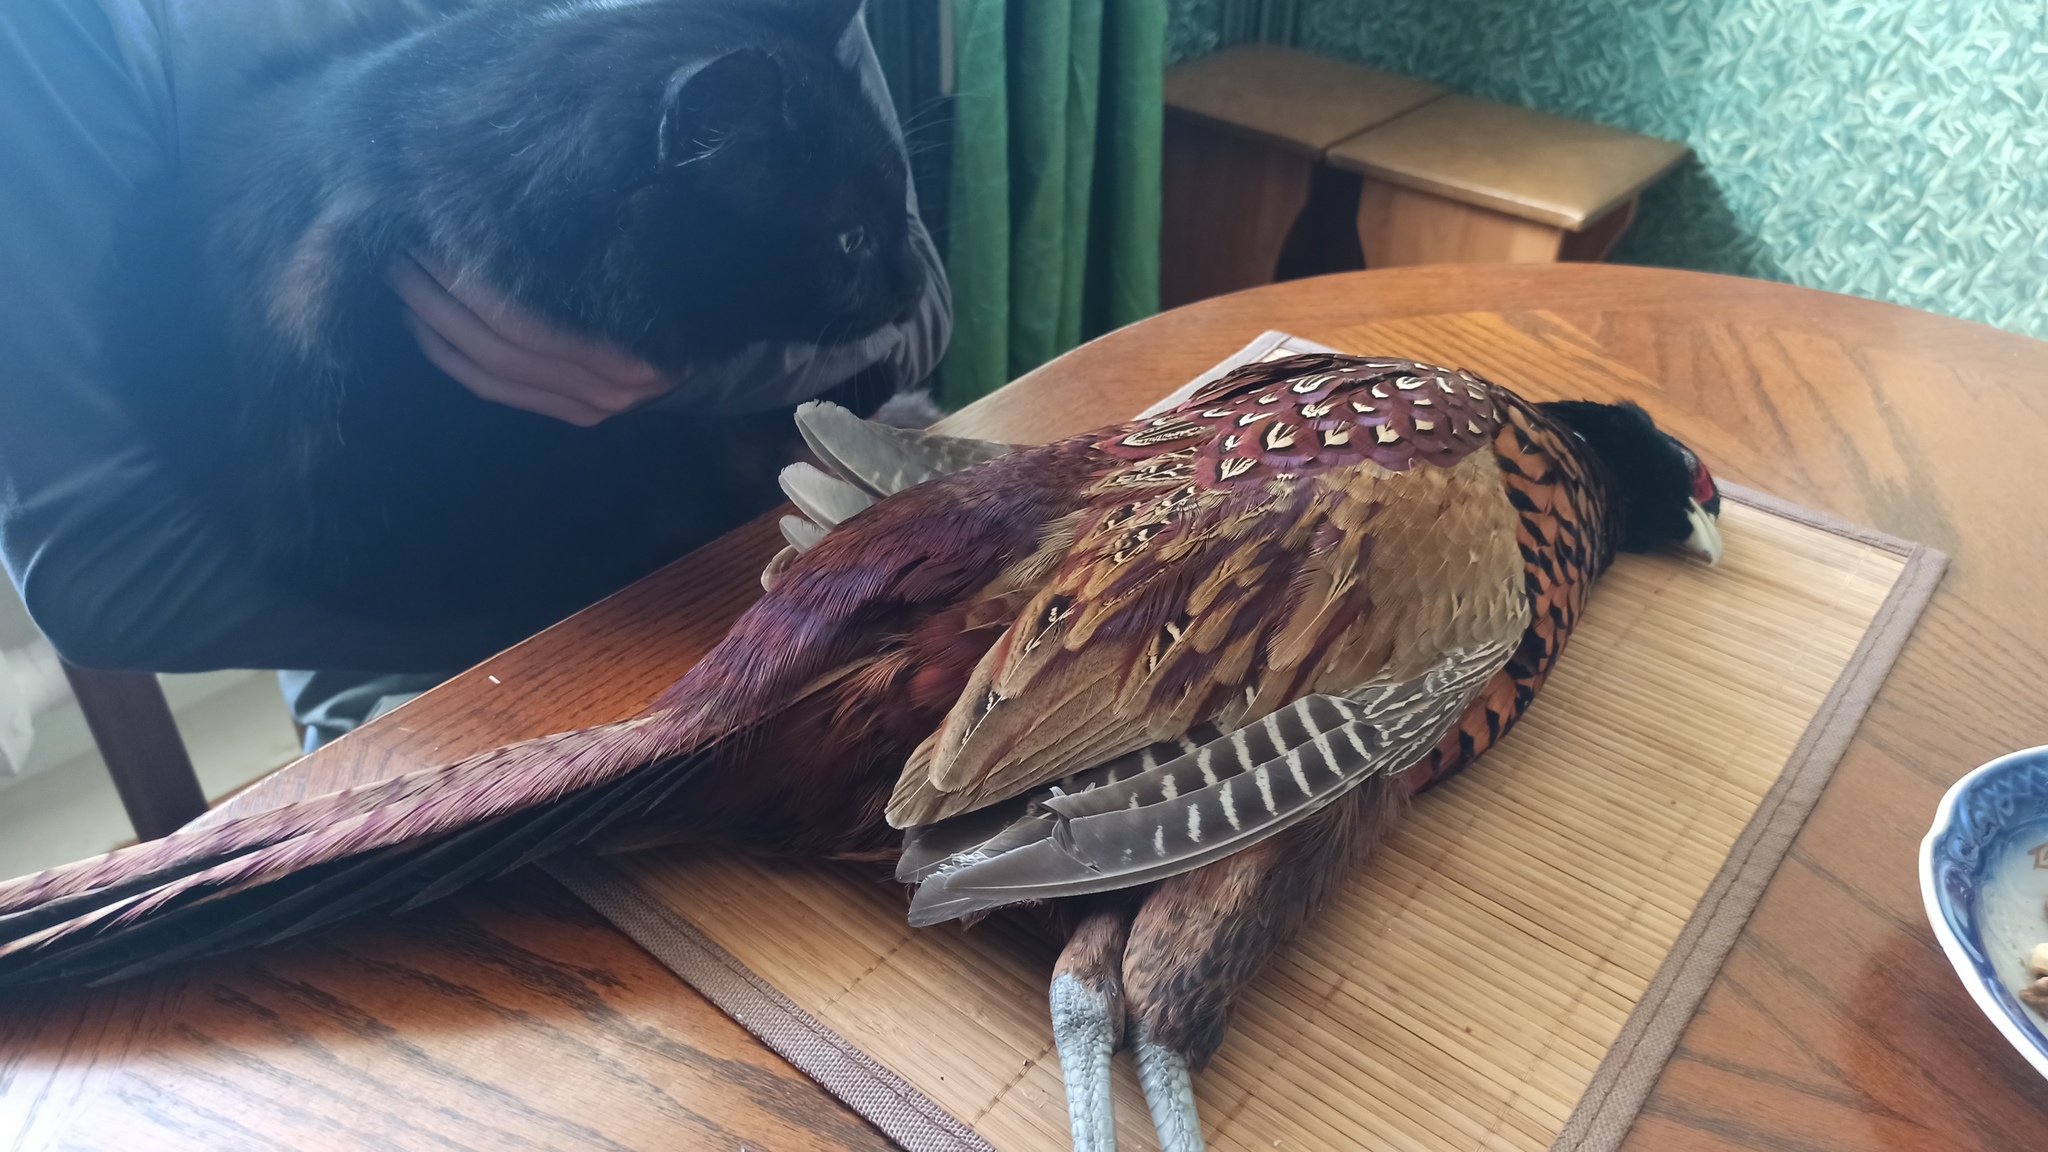 The morning begins with game! - My, Game, Pheasant, Life stories